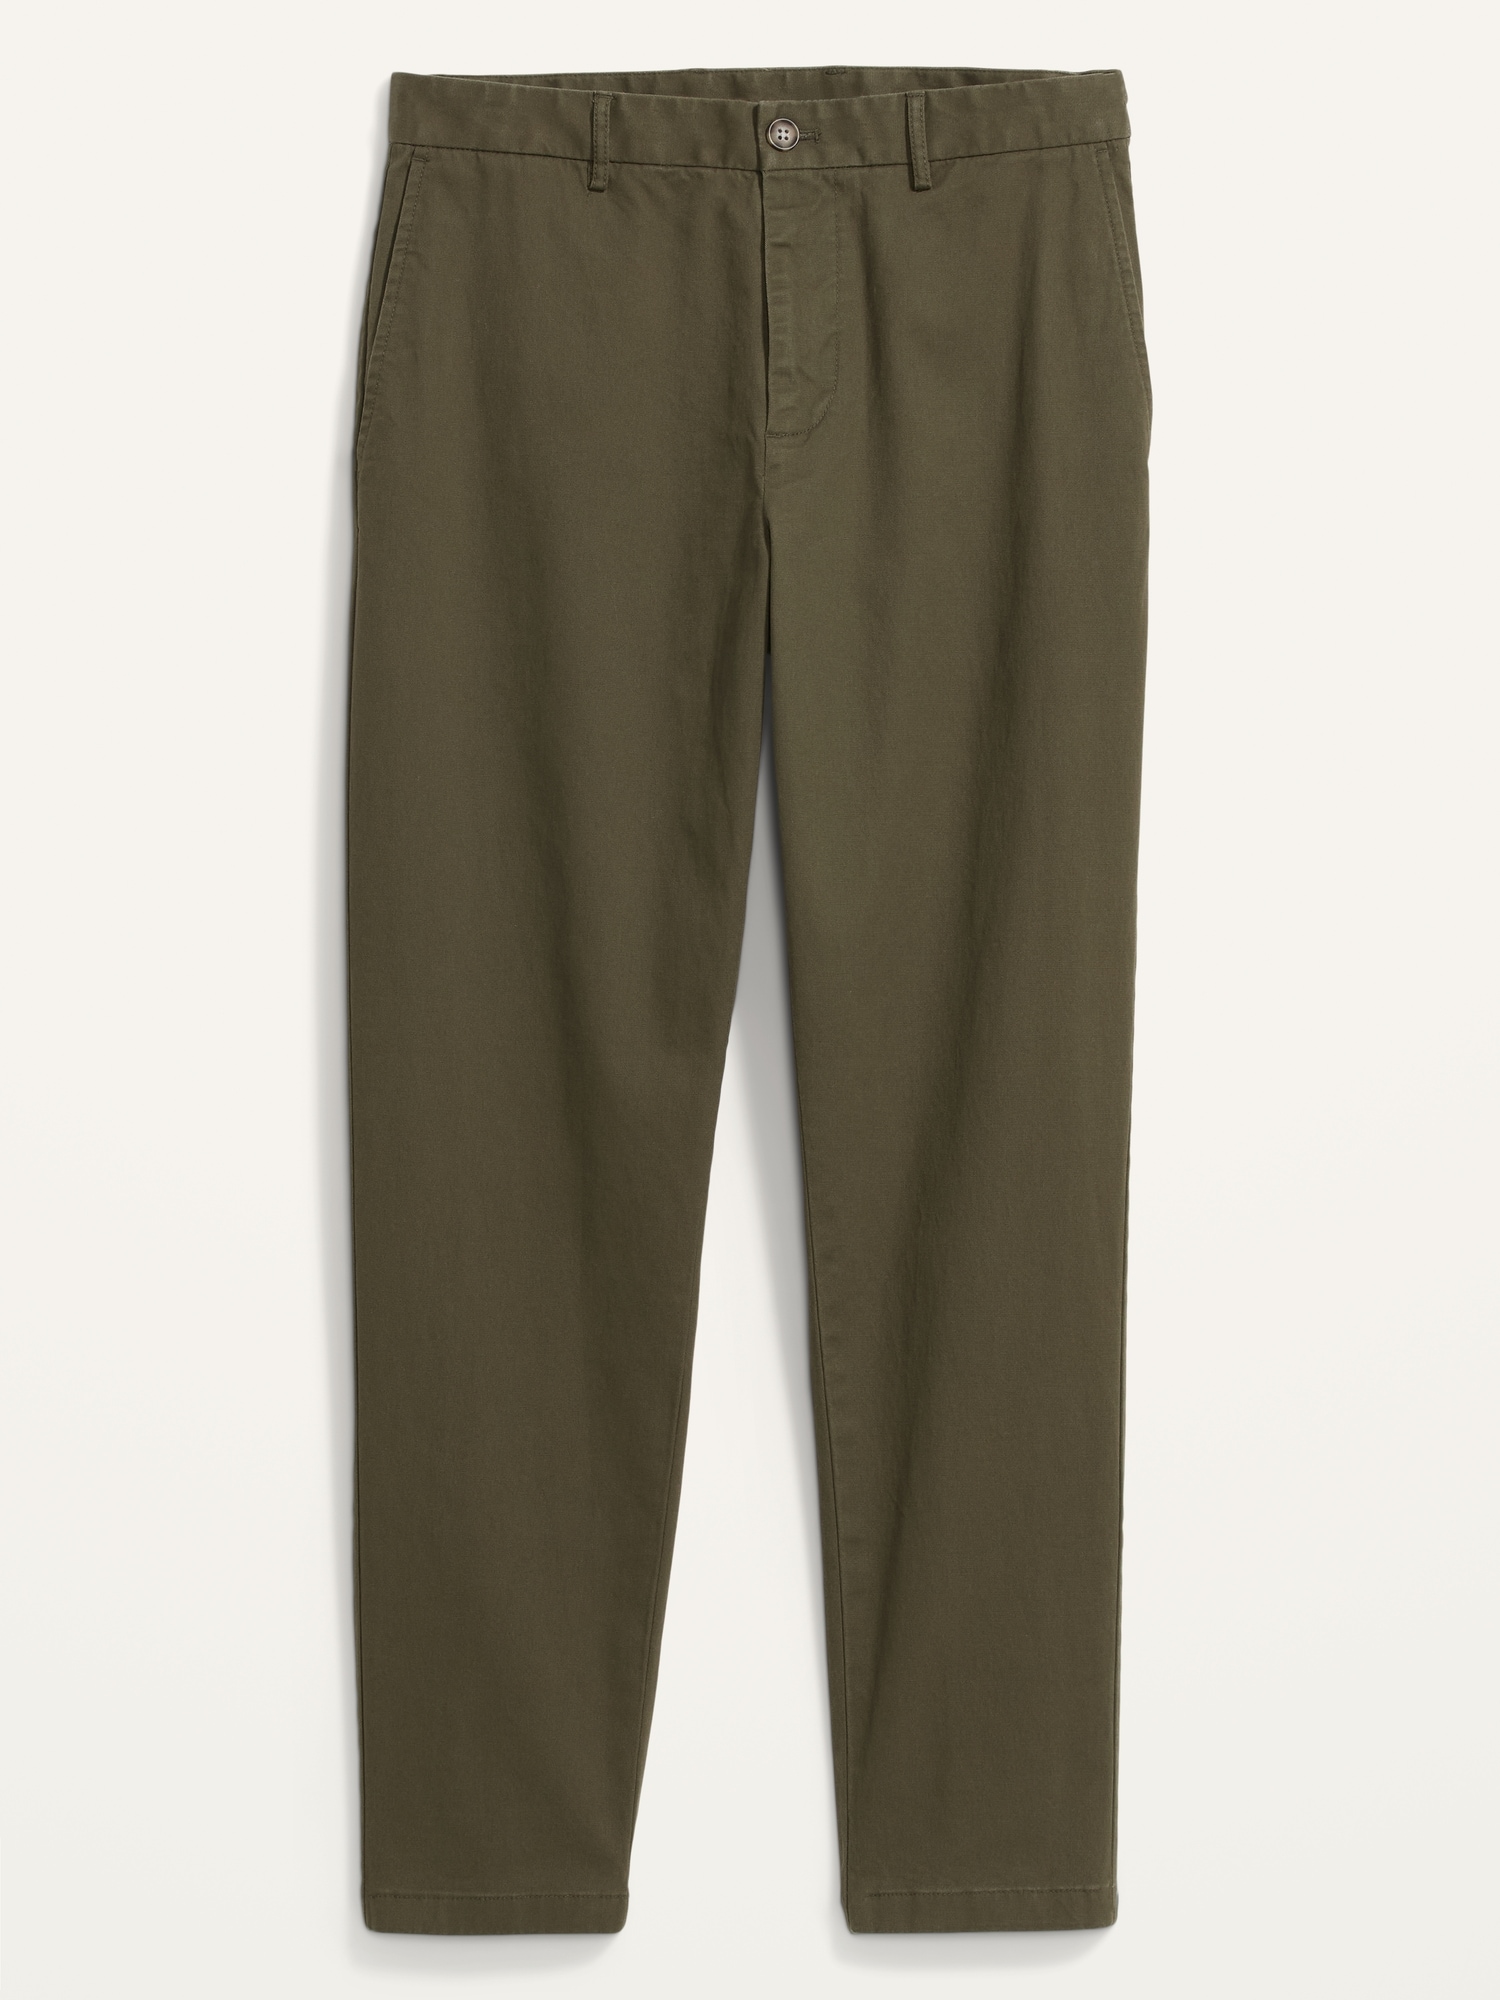 Old Navy Loose Taper Built-In Flex Rotation Ankle-Length Chino Pants for Men green. 1